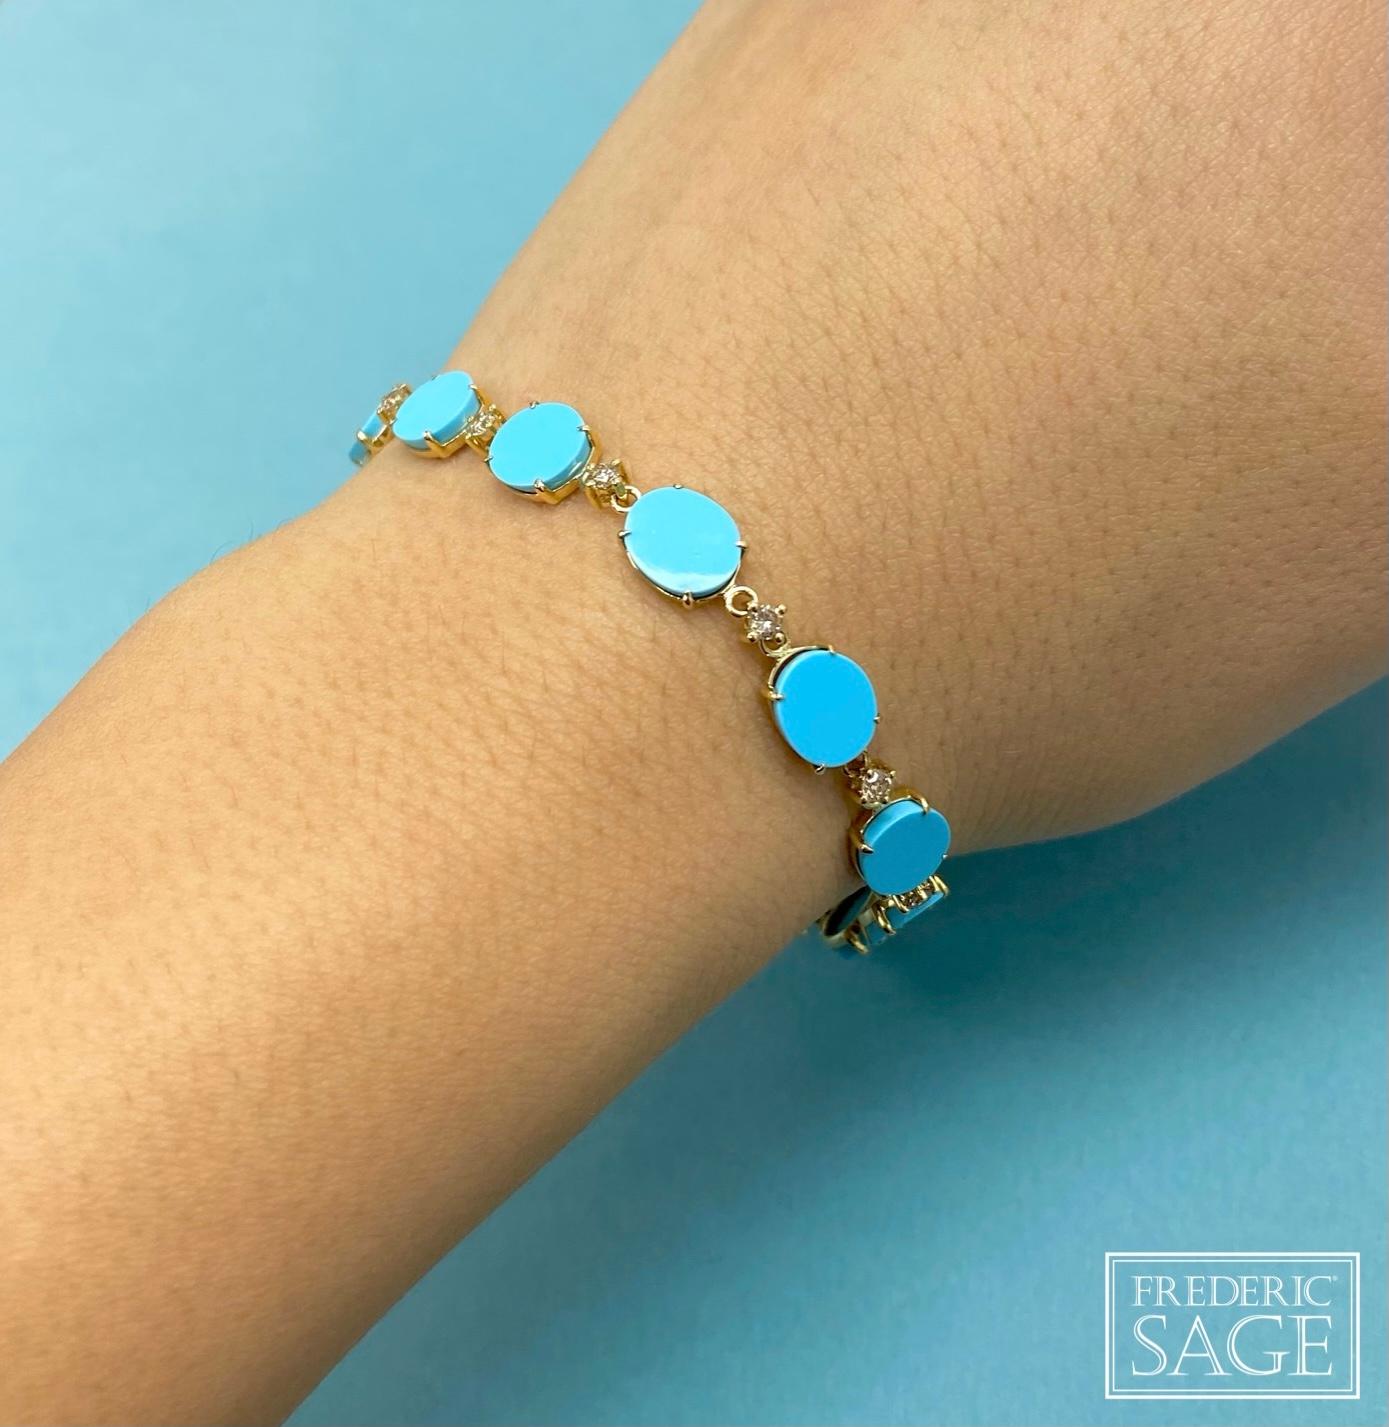 Oval Mini Turquoise And Brown Diamond 12 Link Tivoli II Bracelet, Brown Diamond 0.57 Ct, Turquoise 8.34 Ct

Available in other metal/ gemstone options: This Natural Mineral bracelet can be made in white or pink gold. Also available in other shells